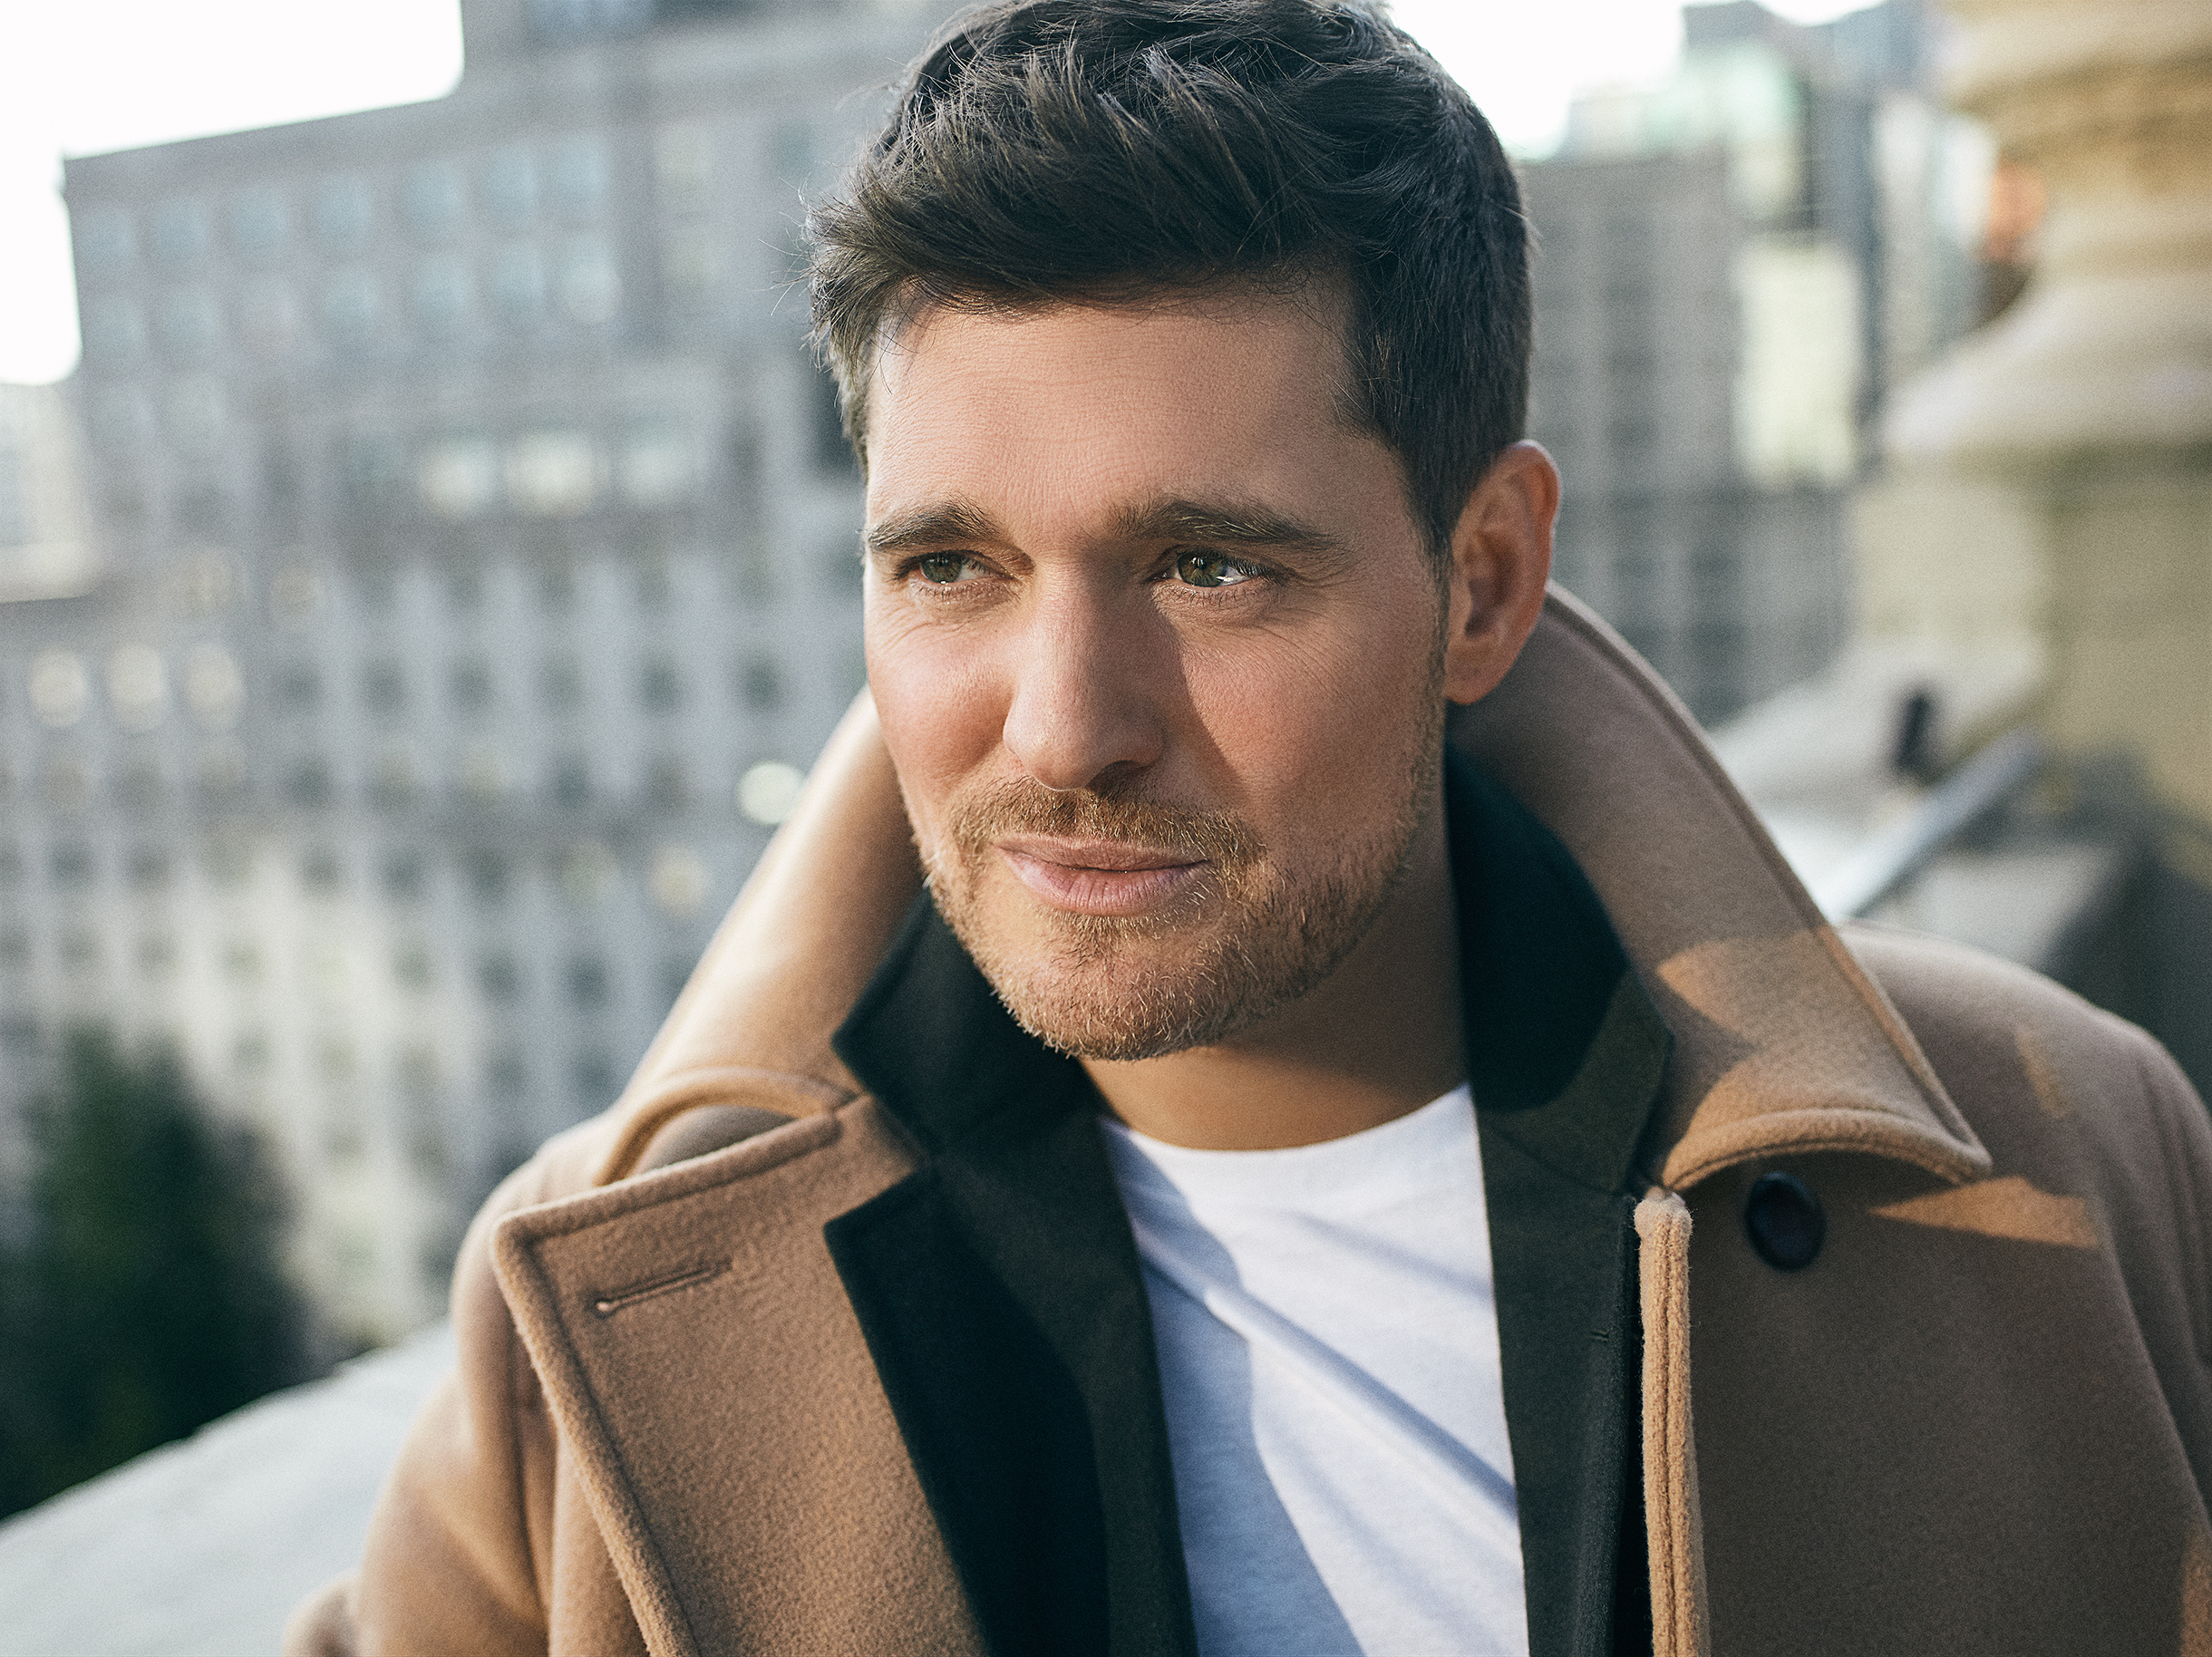 Michael Bublé Everything accords